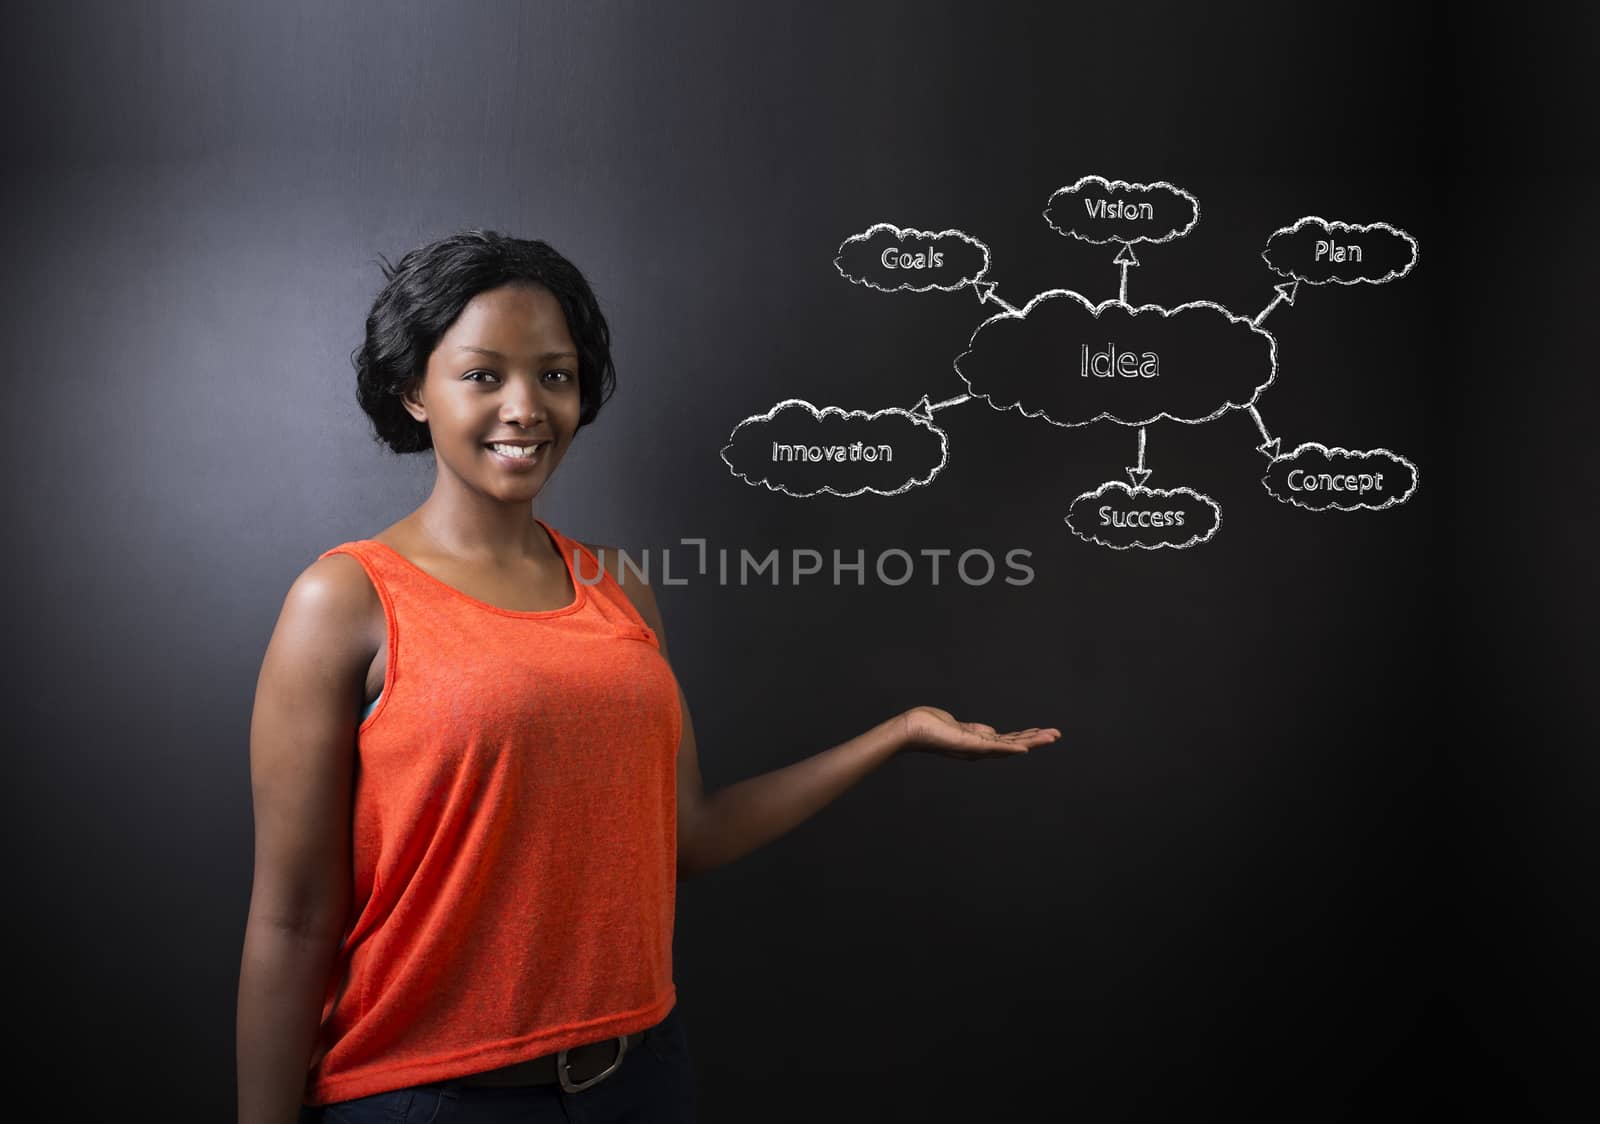 South African or African American woman teacher or student standing with her hand out against a blackboard background with a chalk idea diagram